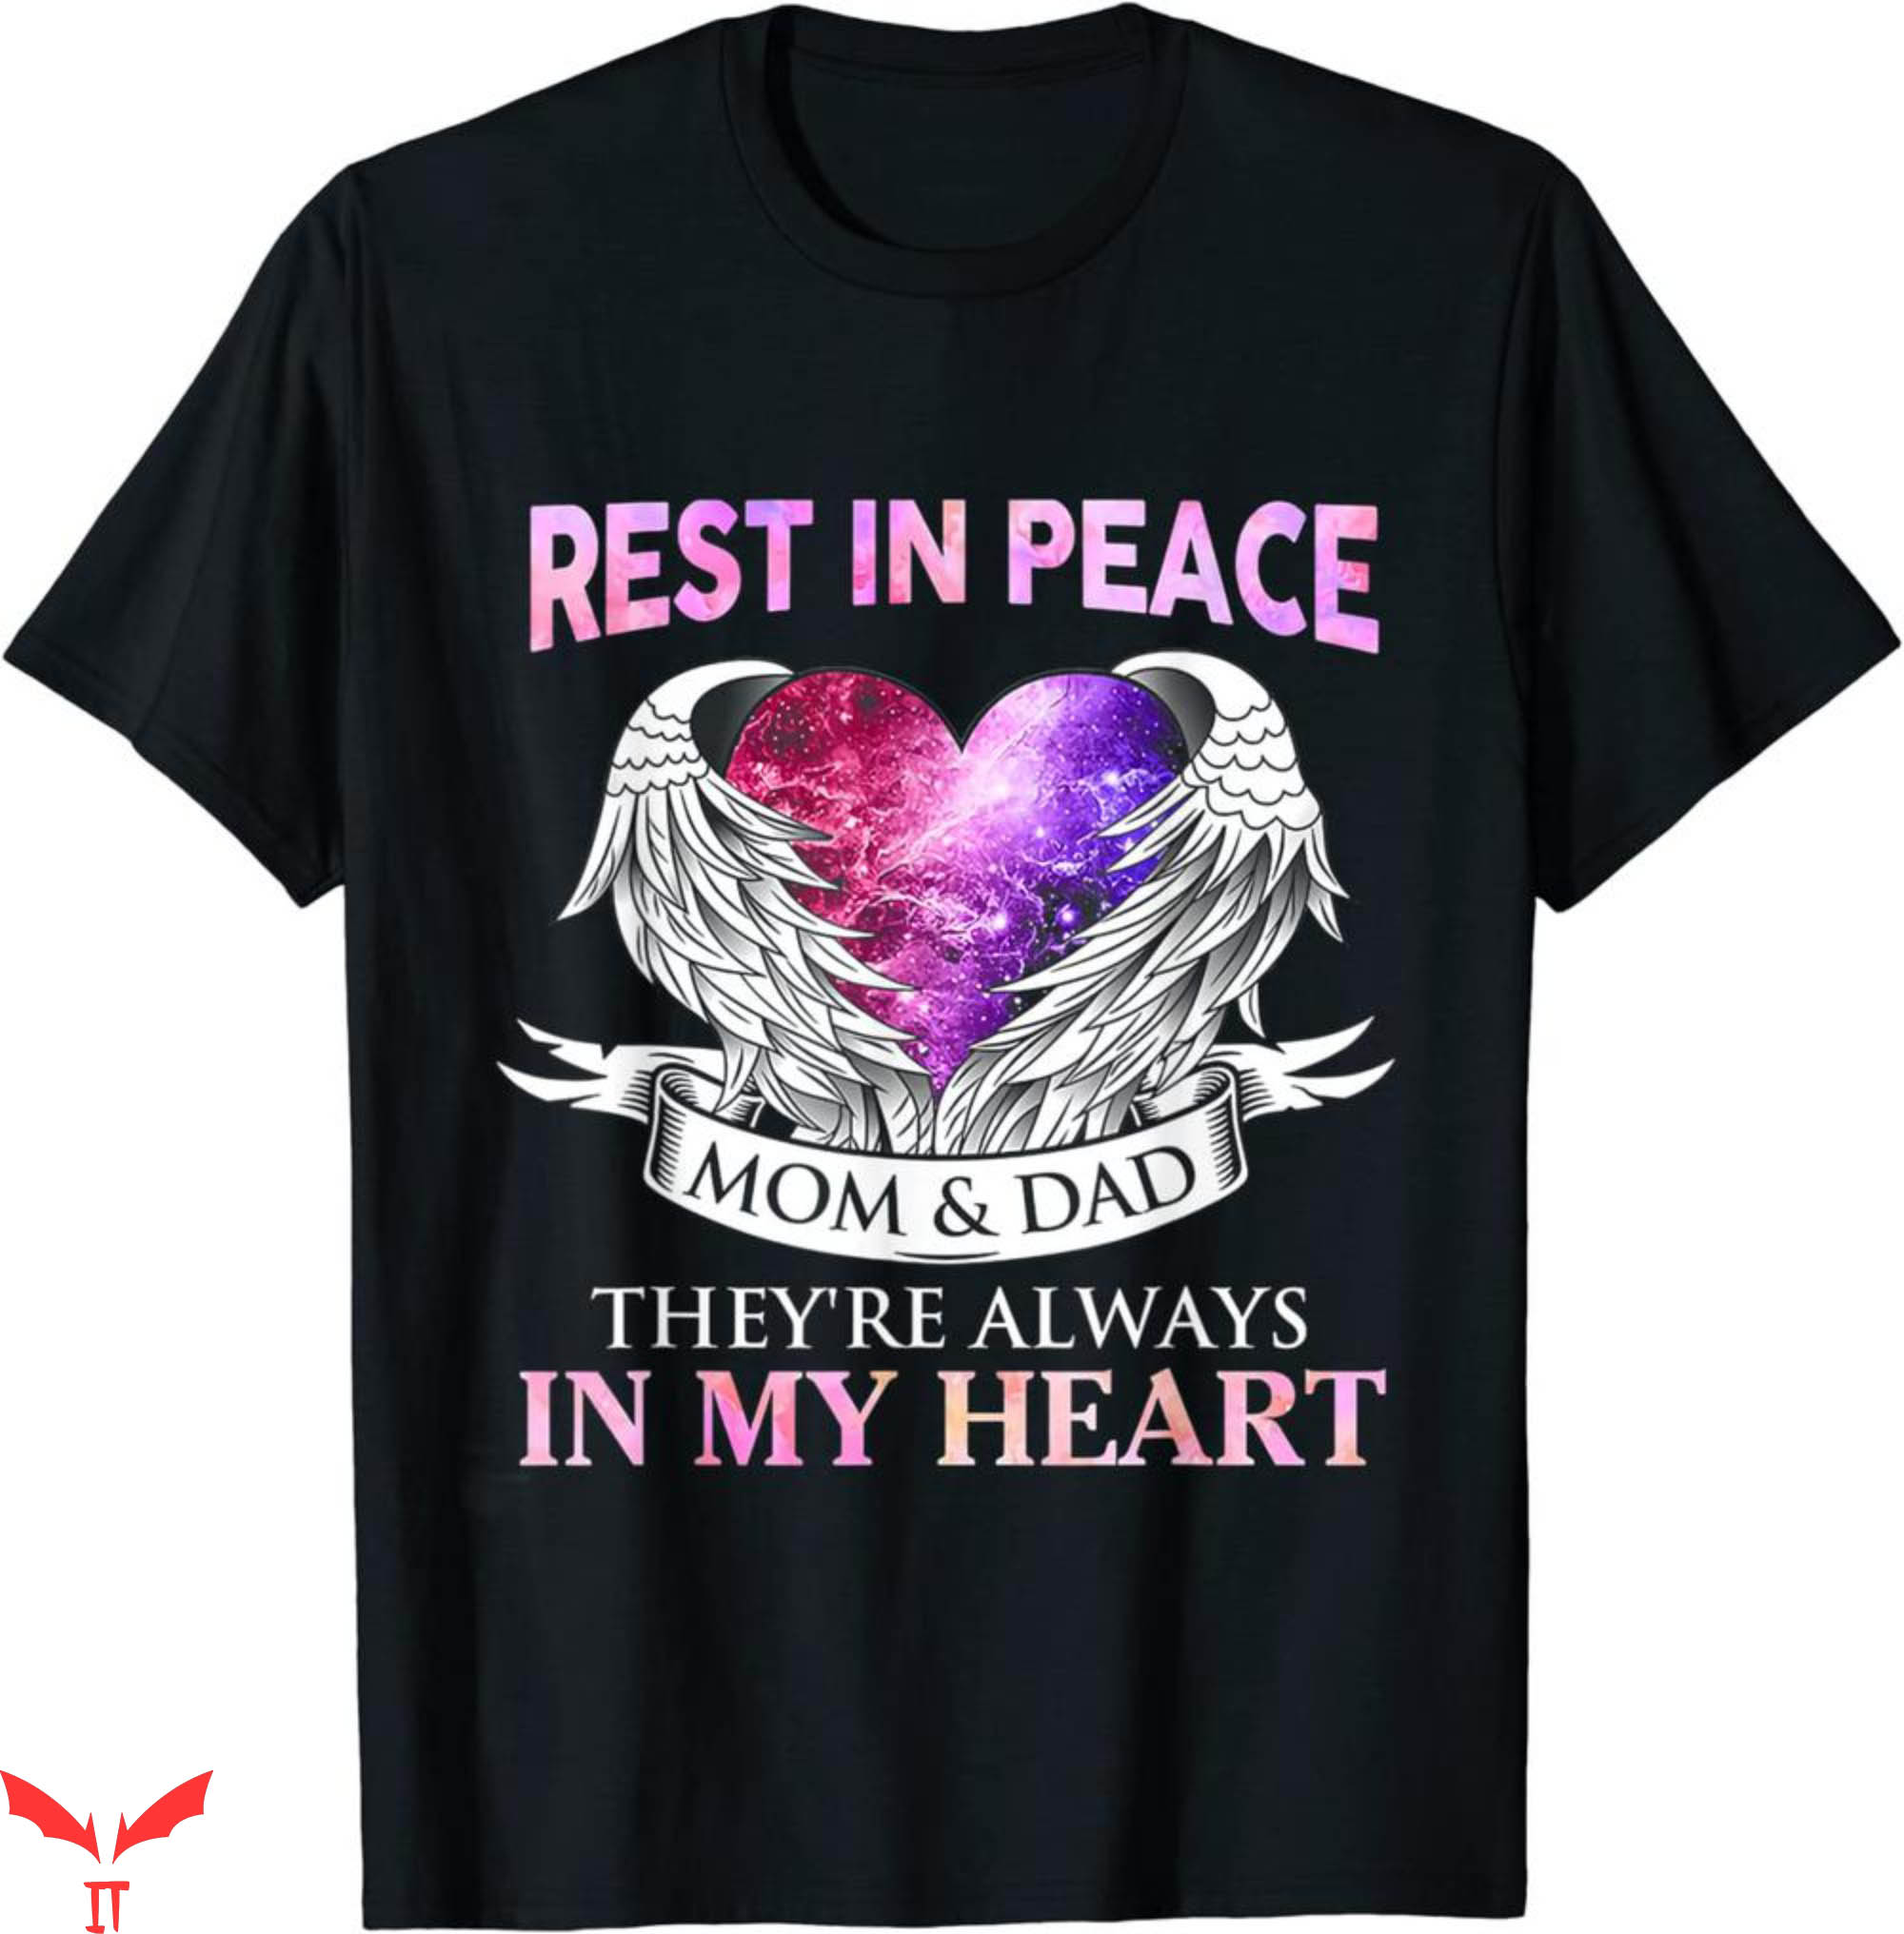 Rest In Peace T-Shirt They Are Always In My Heart Tee Shirt